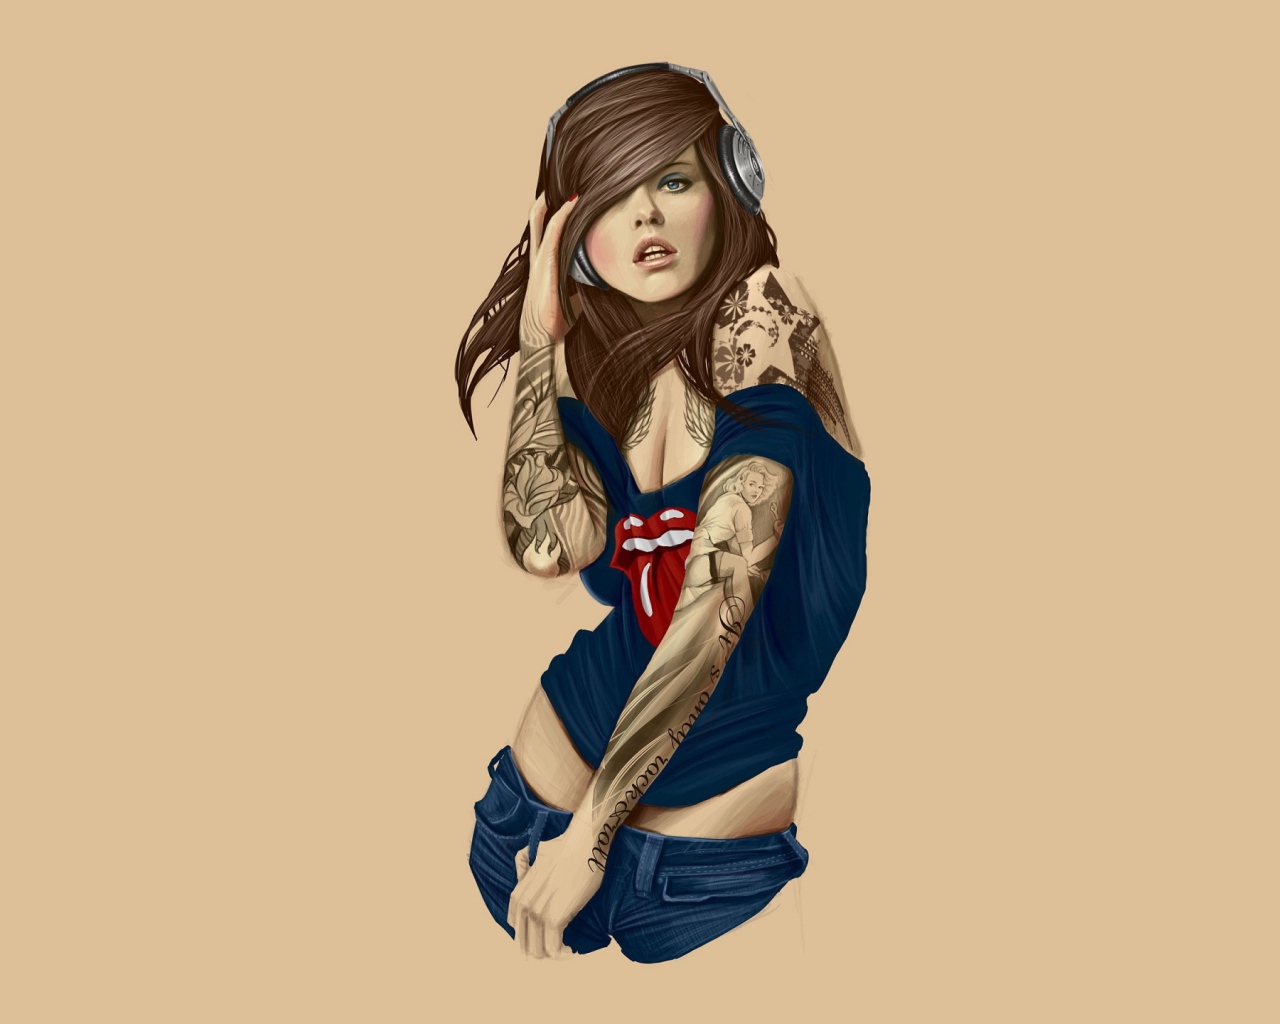 Modern girl with tattoos on his hands